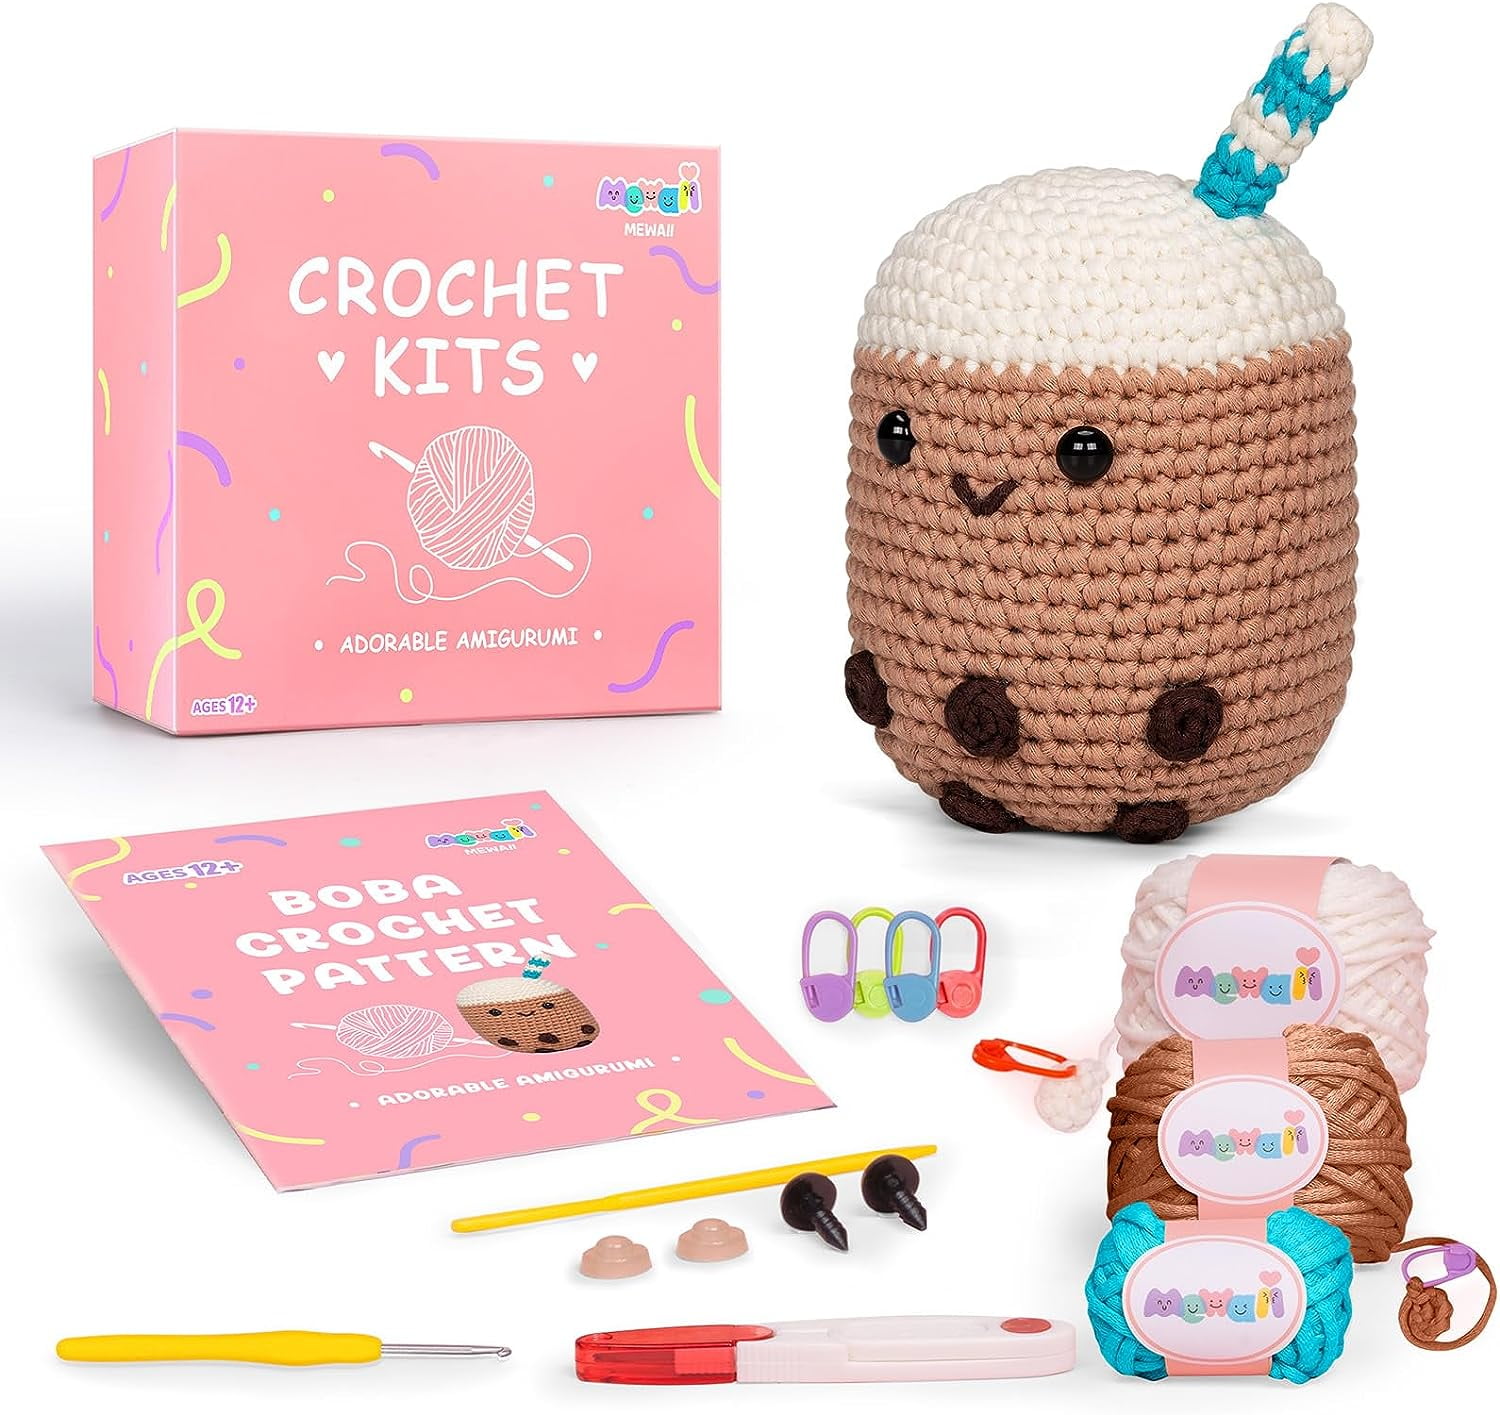  TMYIOYC Crochet Kit for Beginners, All in One Crochet Knitting  Kit, Crochet Starter Kit for Adult Kids with Step-by-Step Video Tutorials,  4 Pack Plants DIY Yarn Kit